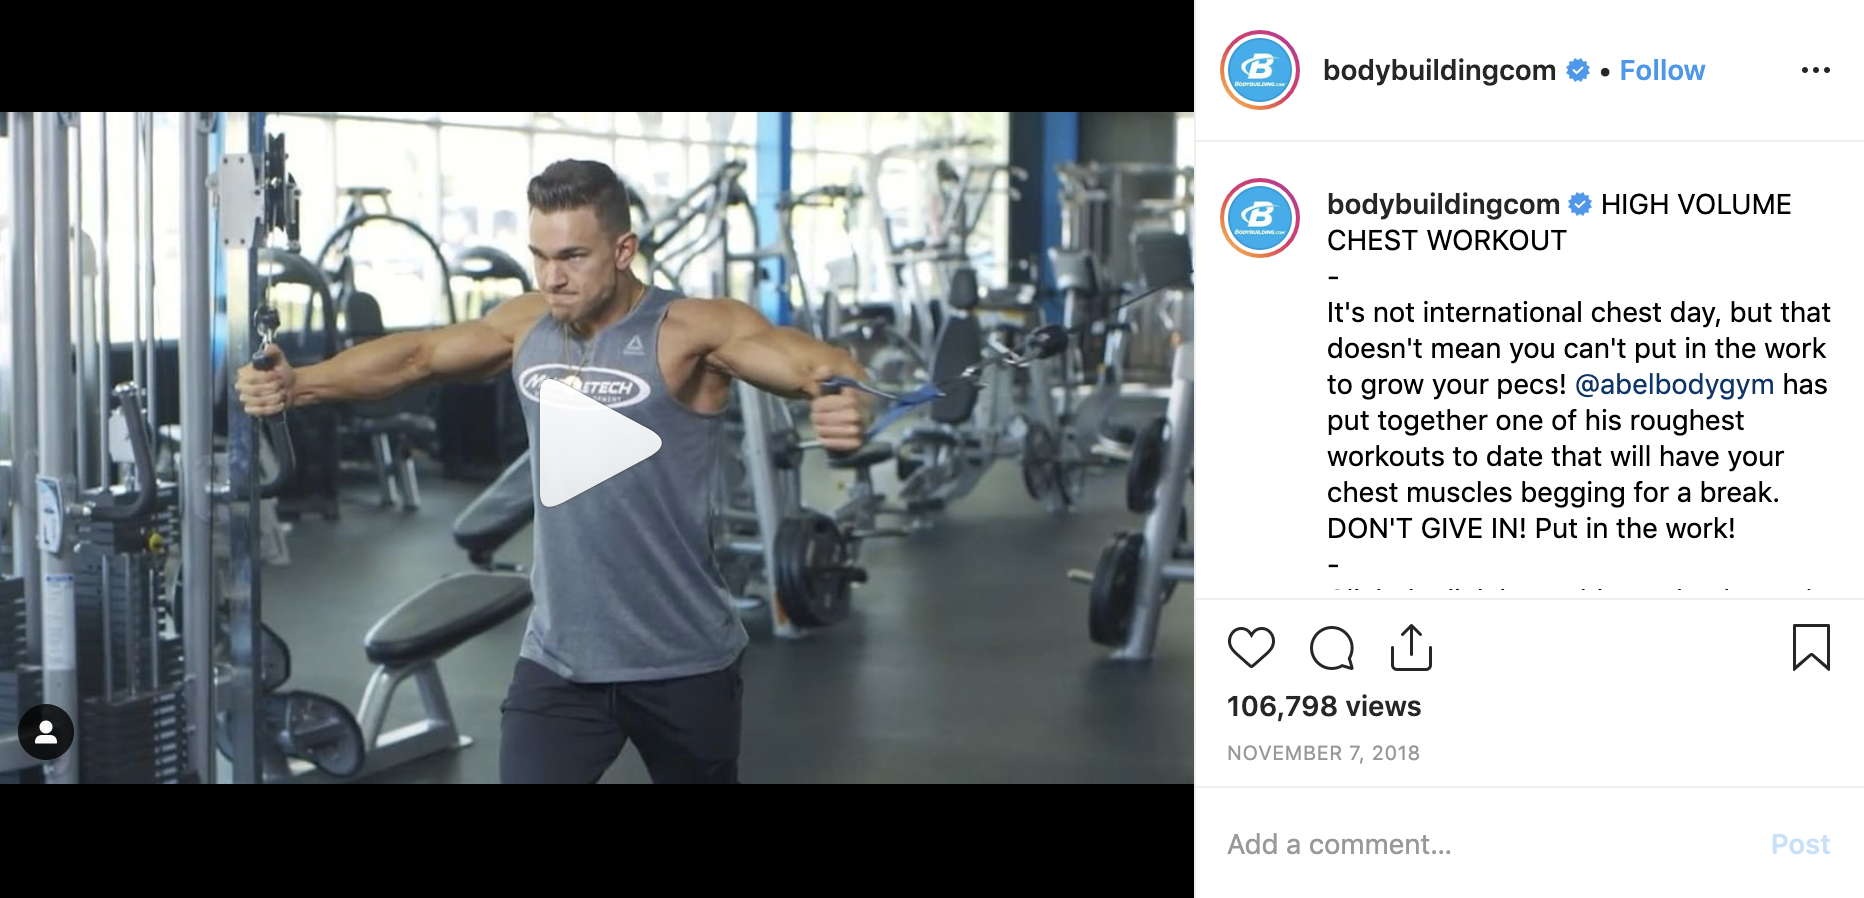  Work with partner branded influencer to create workout footage. Doubled the average views. 